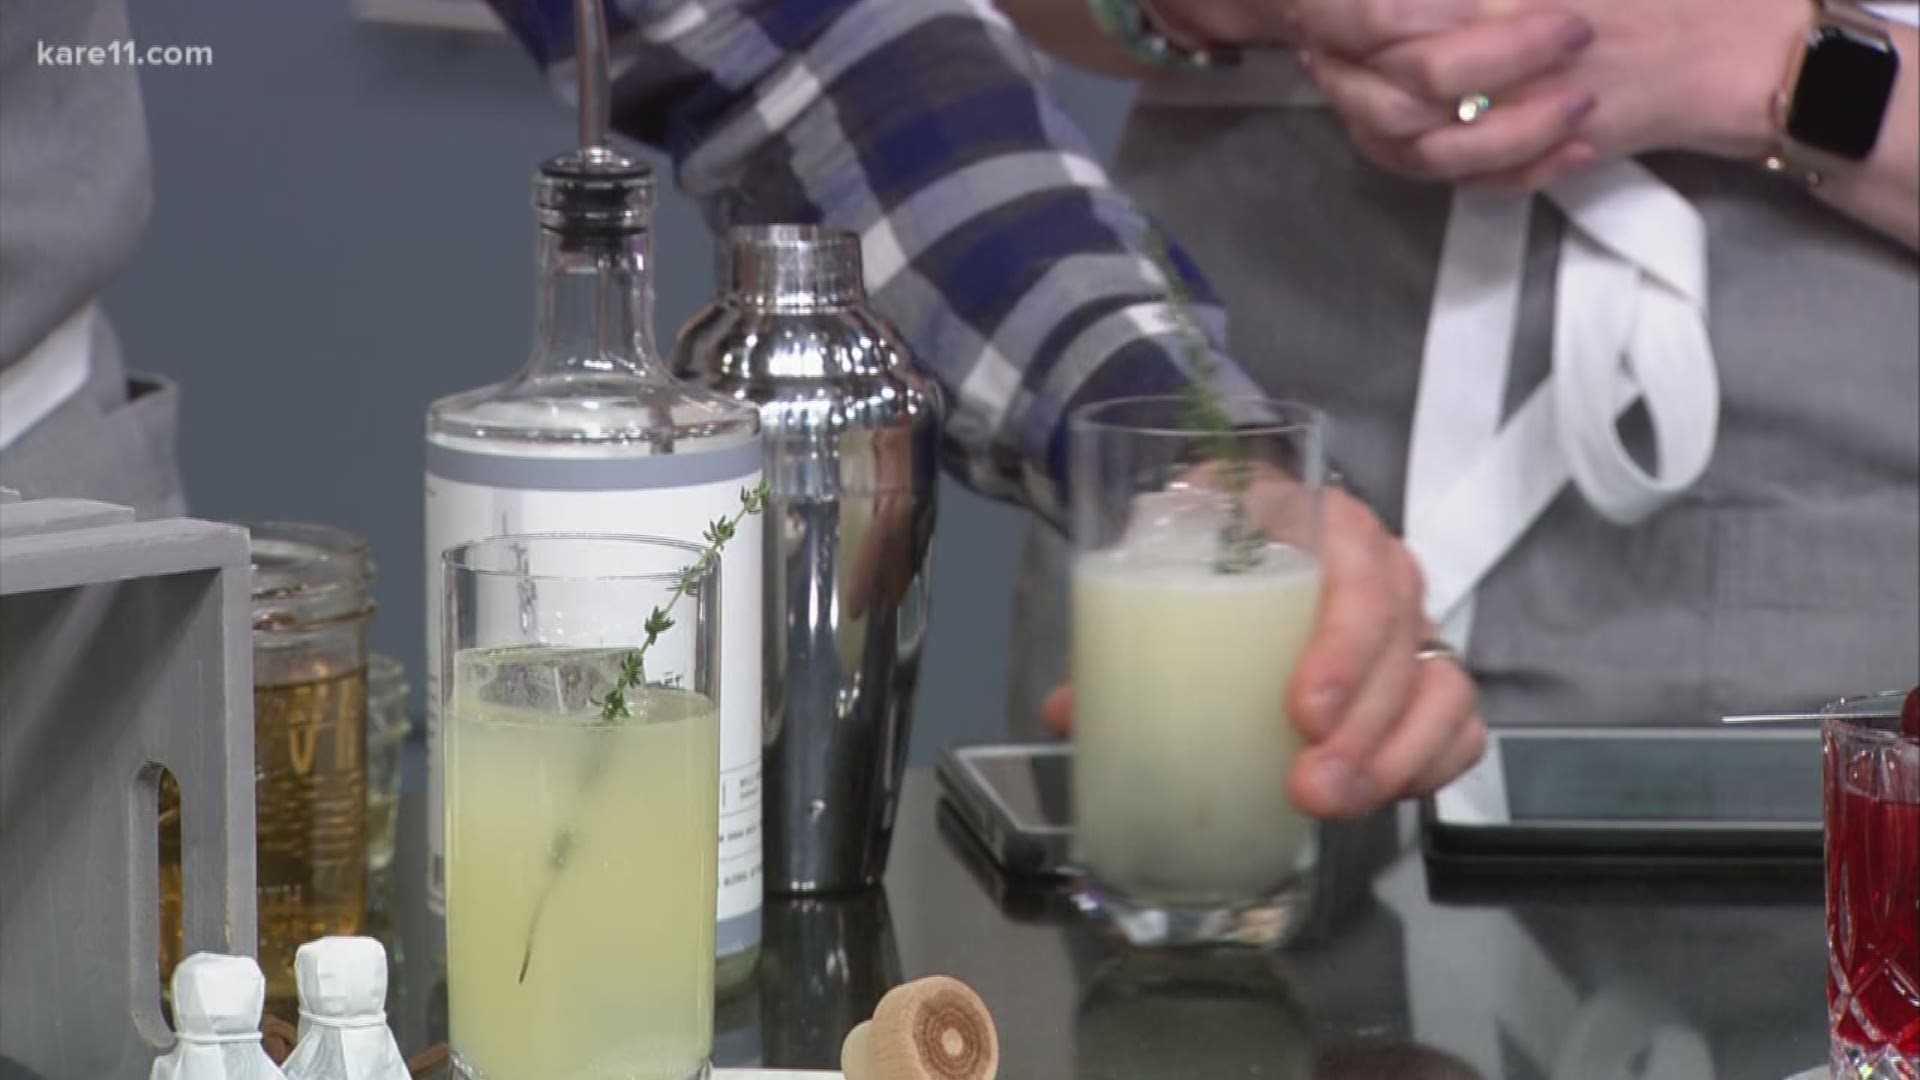 Check out these delicious holiday cocktail recipes.
https://kare11.tv/2Kf4Vdj